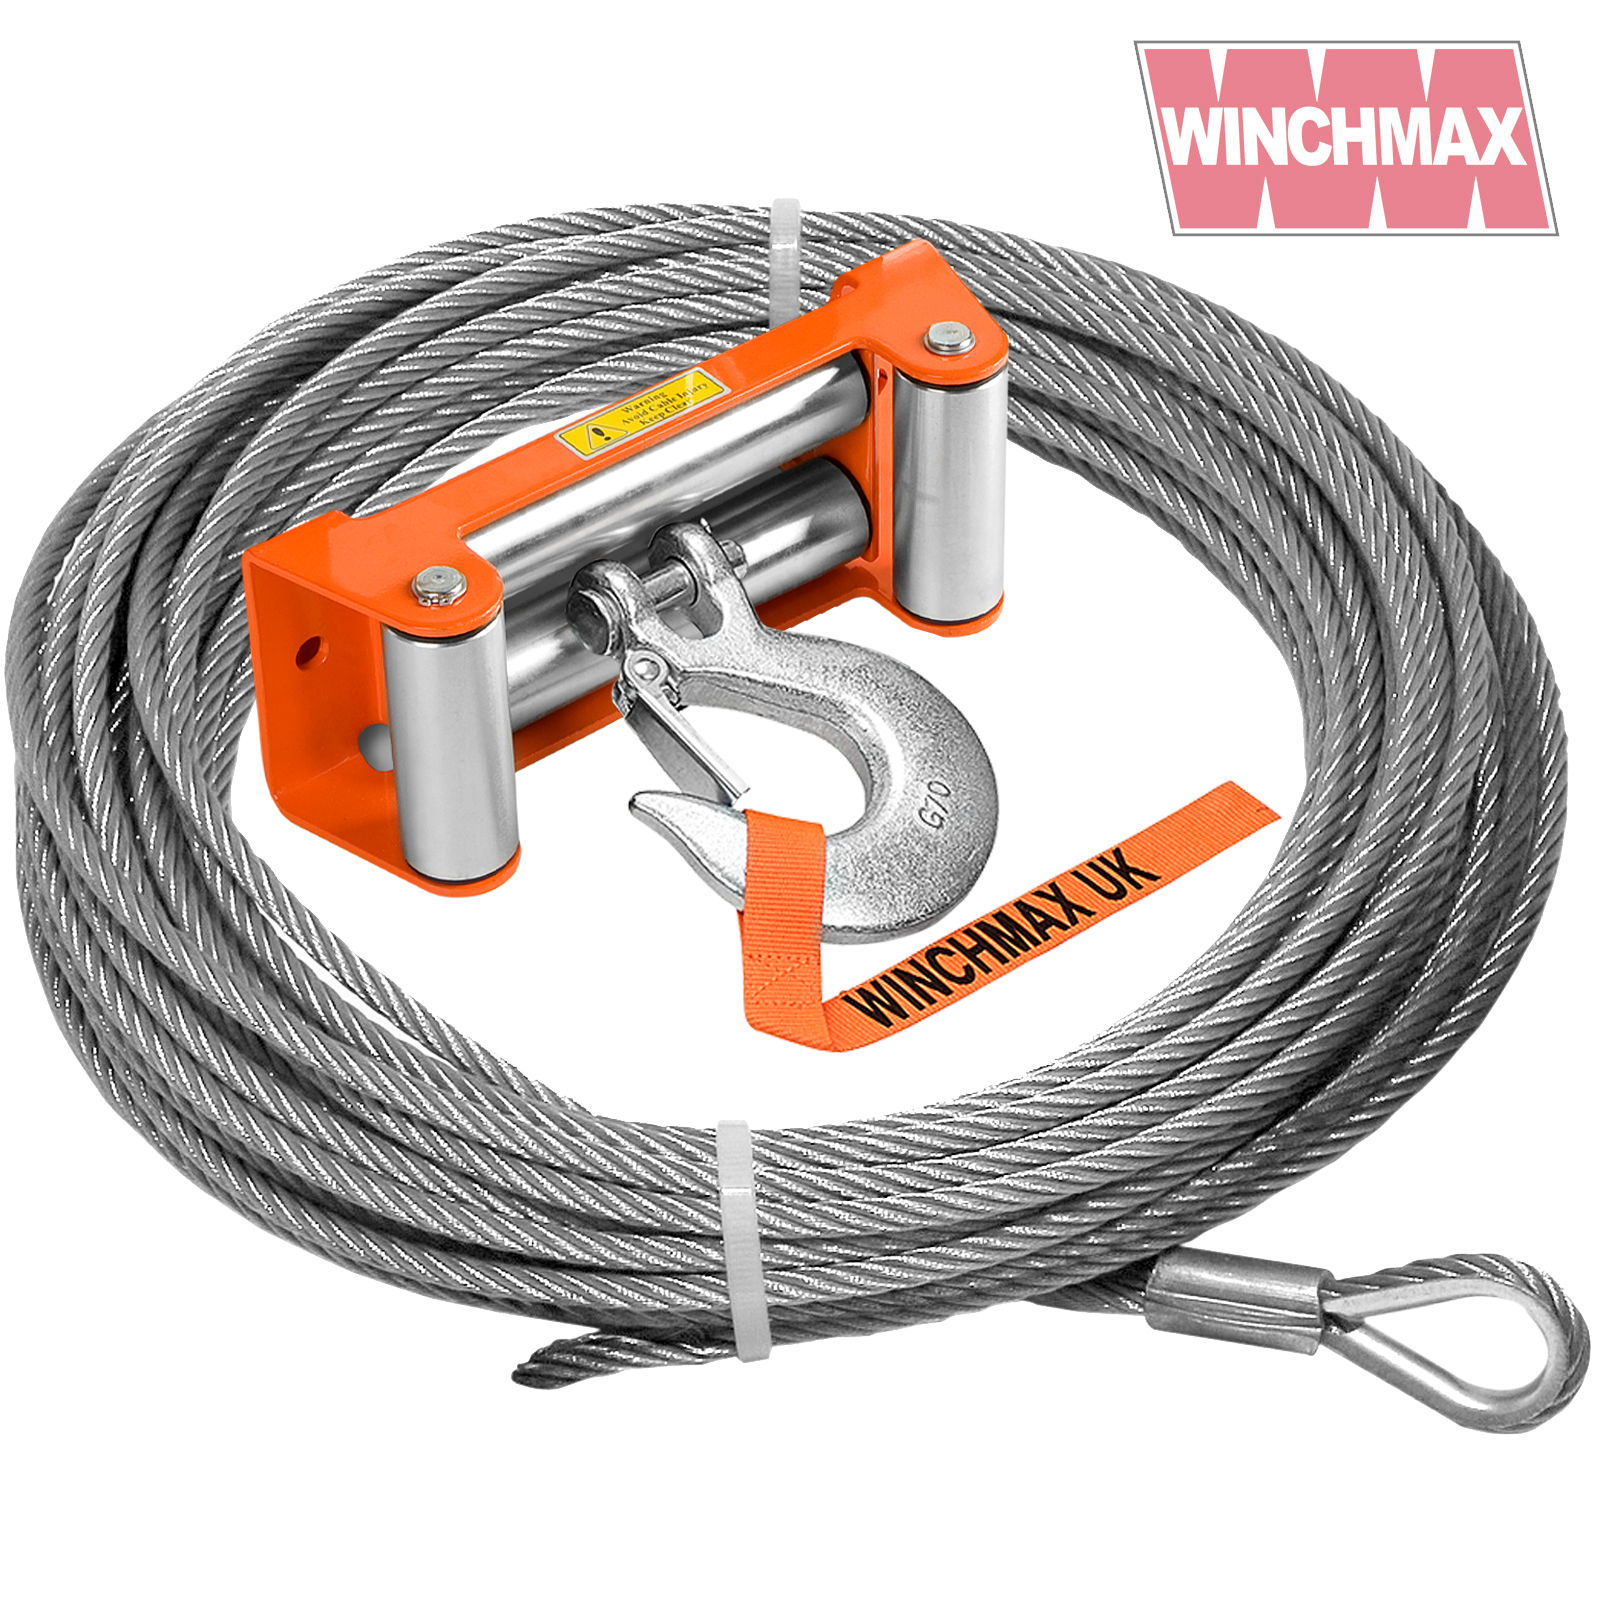 https://www.winchmax.co.uk/wp-content/uploads/2021/12/WMWRPACK6Ha-1.png